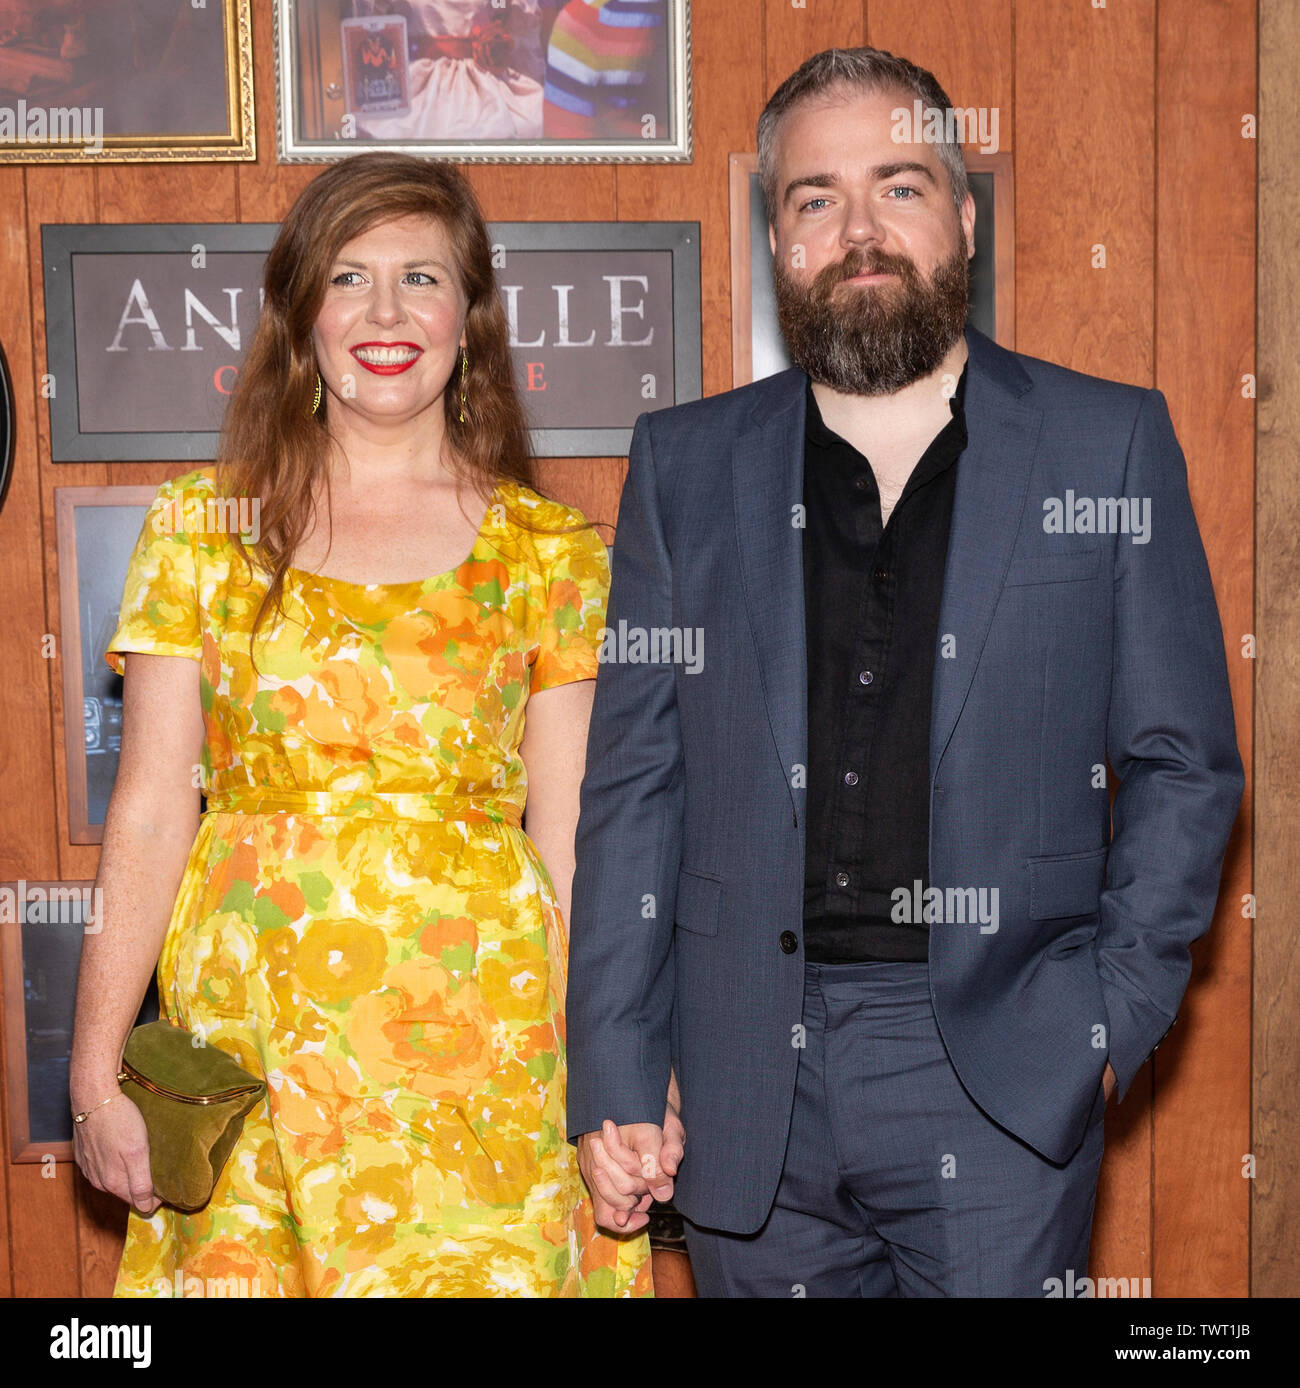 Westwood, CA - June 20, 2019: Lotta Losten and David Sandberg attend the Premiere Of Warner Bros' 'Annabelle Comes Home' held at Regency Village Theat Stock Photo